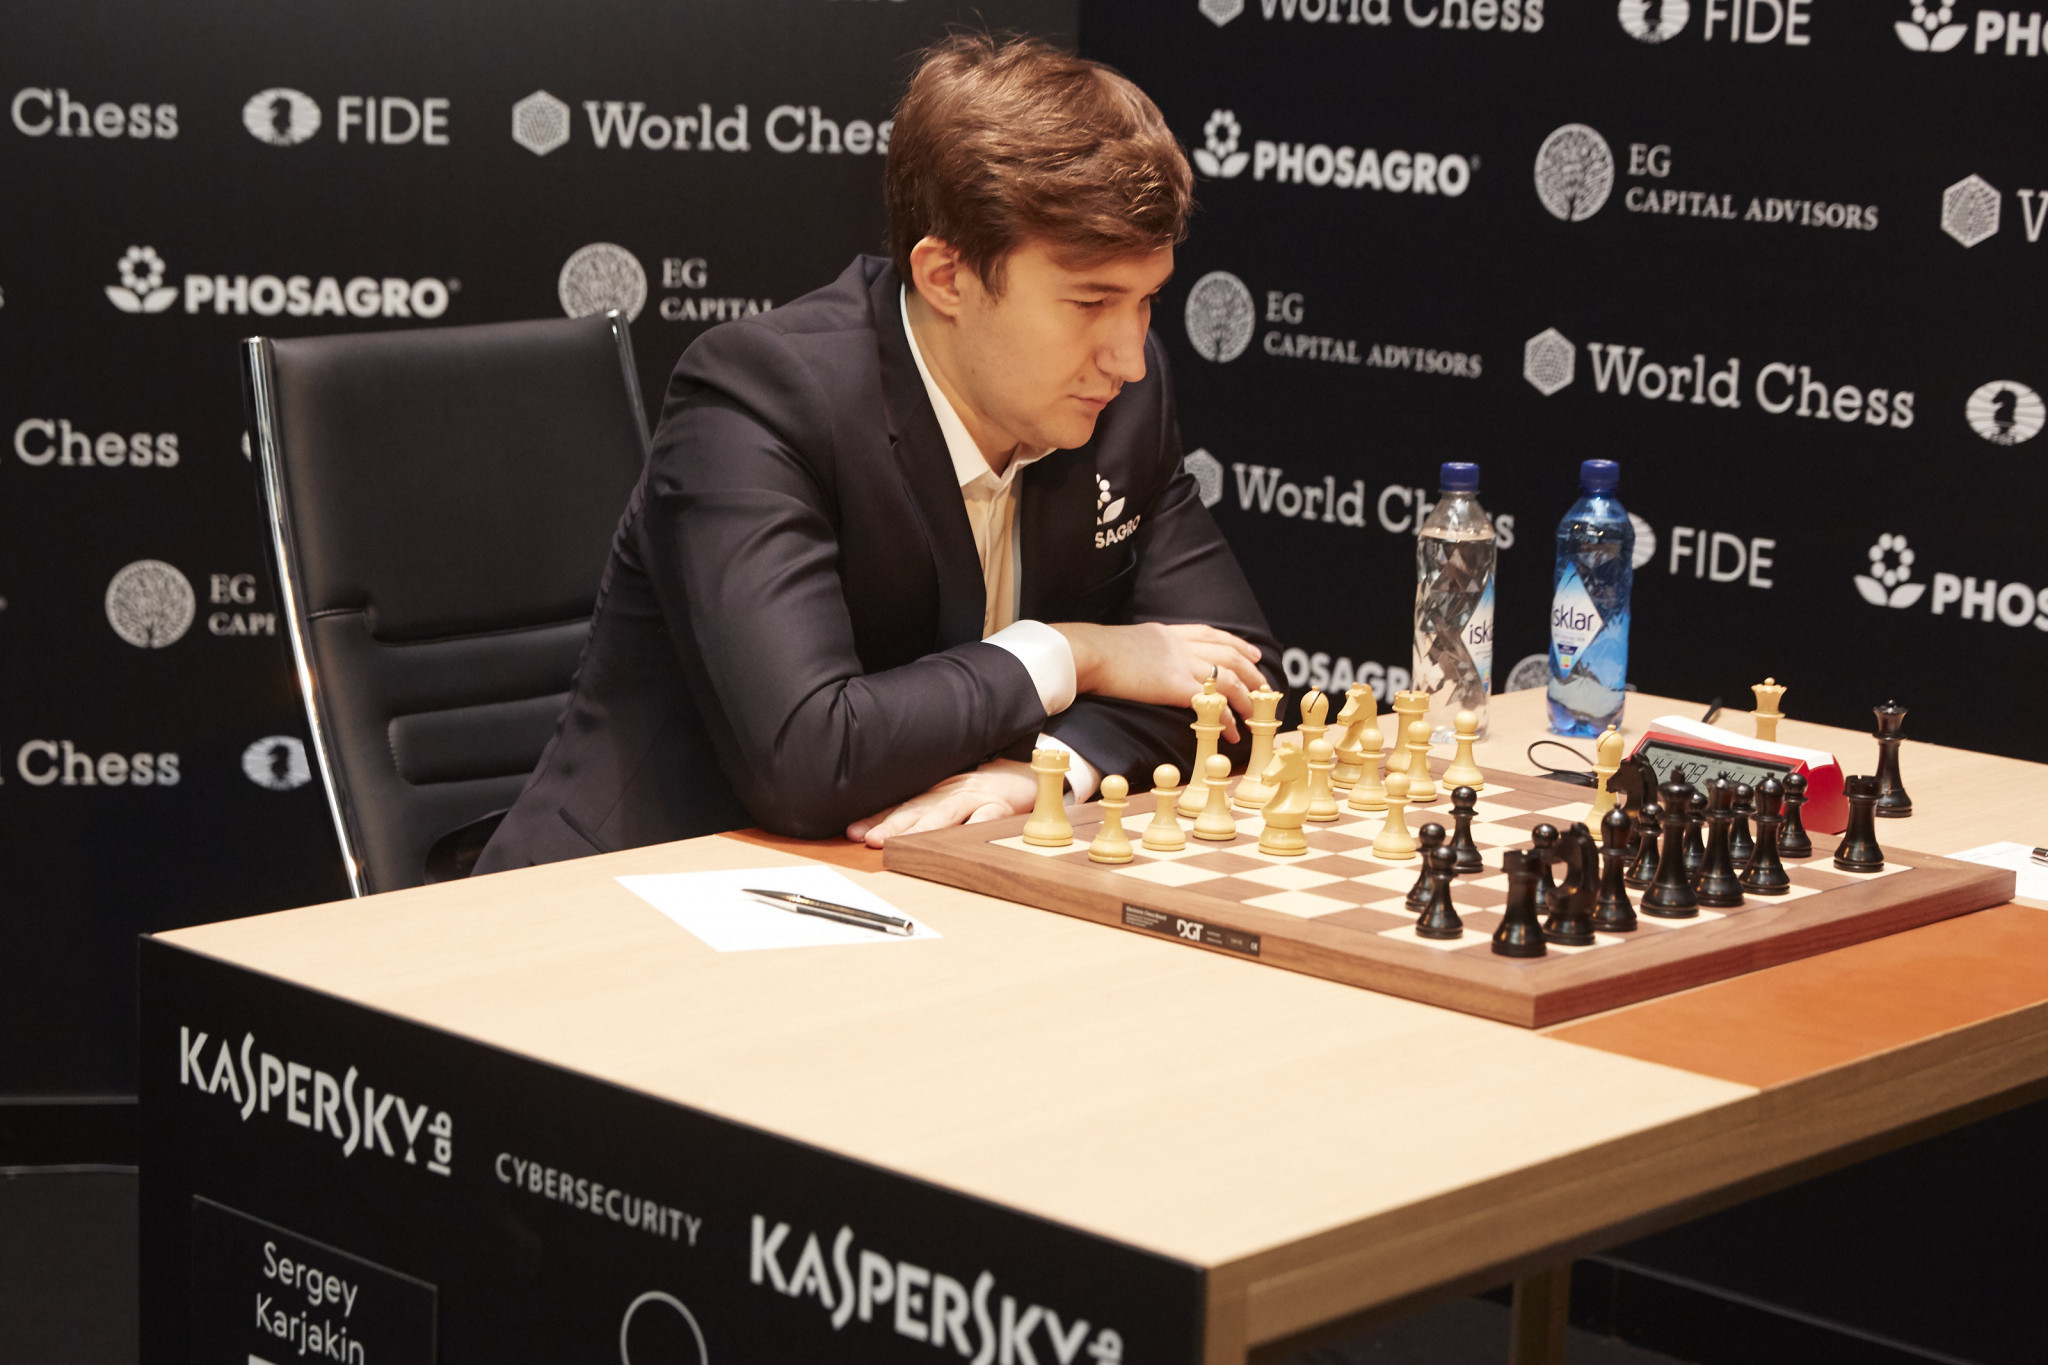 Karjakin says he expects FIDE apology and considers forming alternate international chess federation